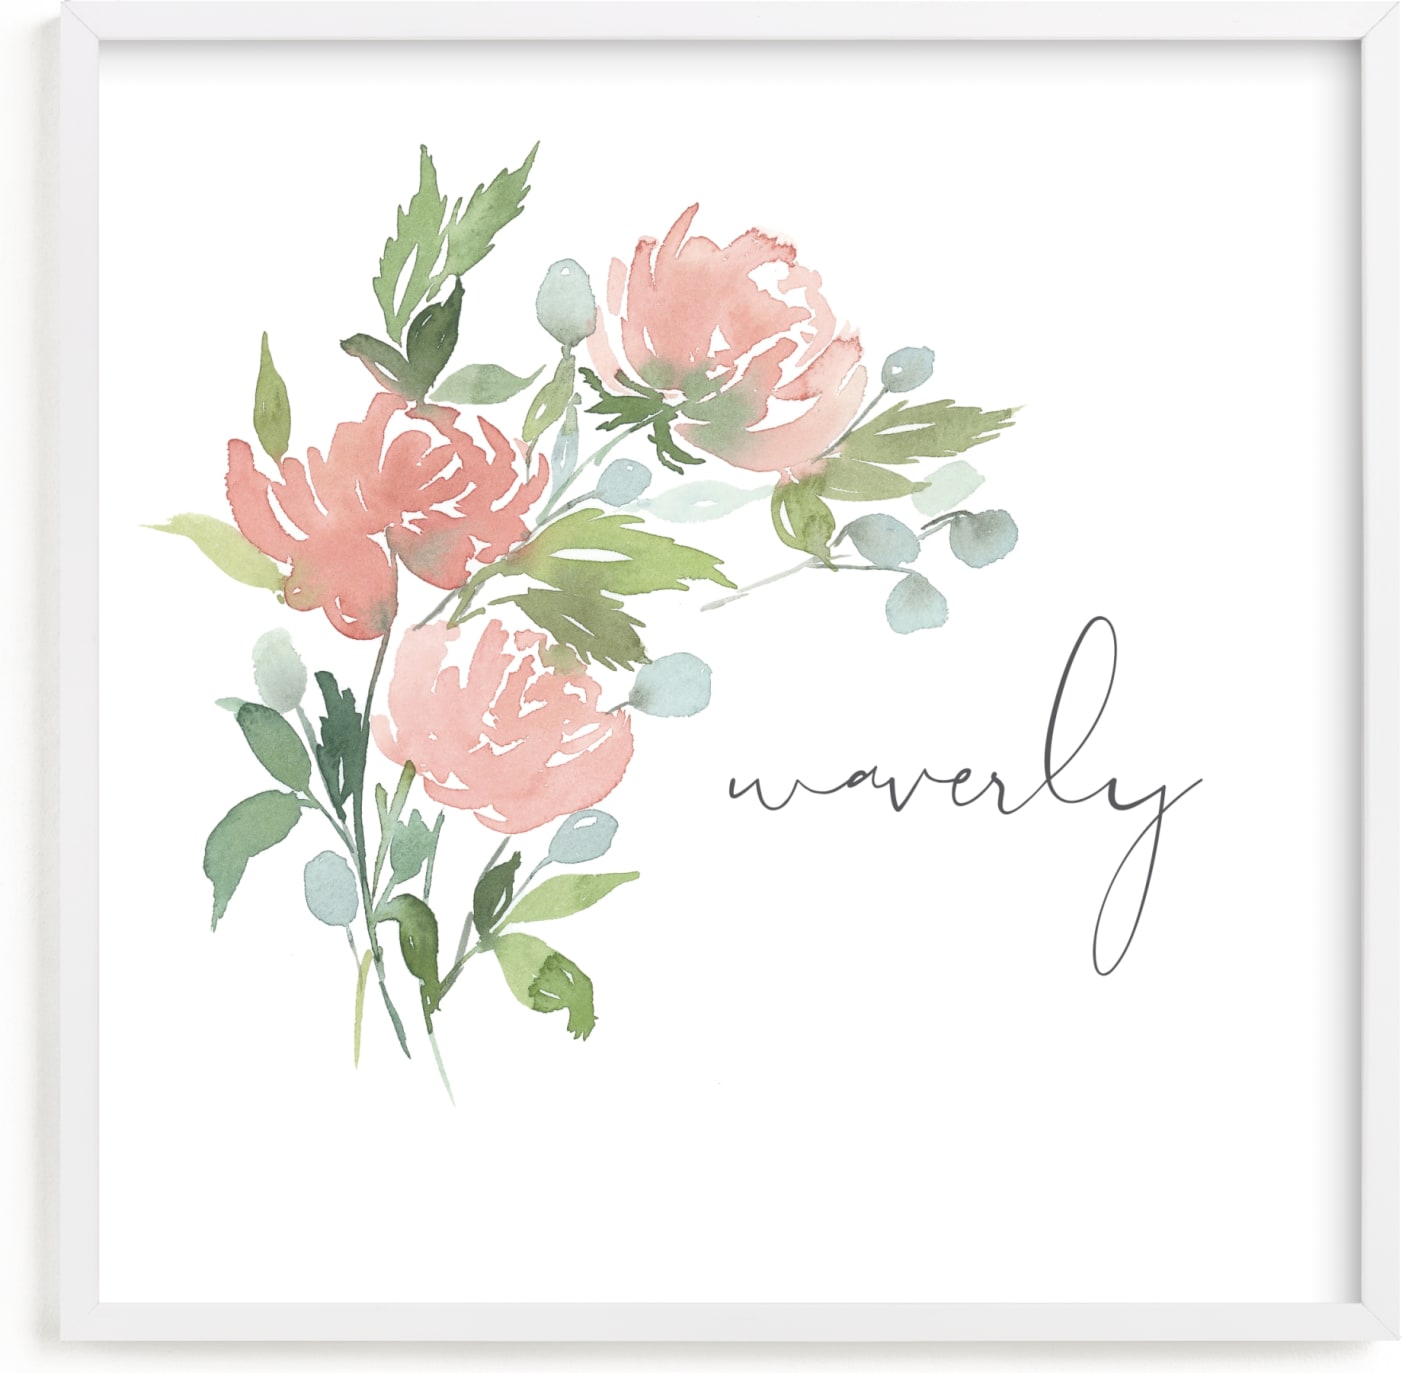 This is a grey personalized art for kid by Stacey Meacham called Watercolor Blooms.